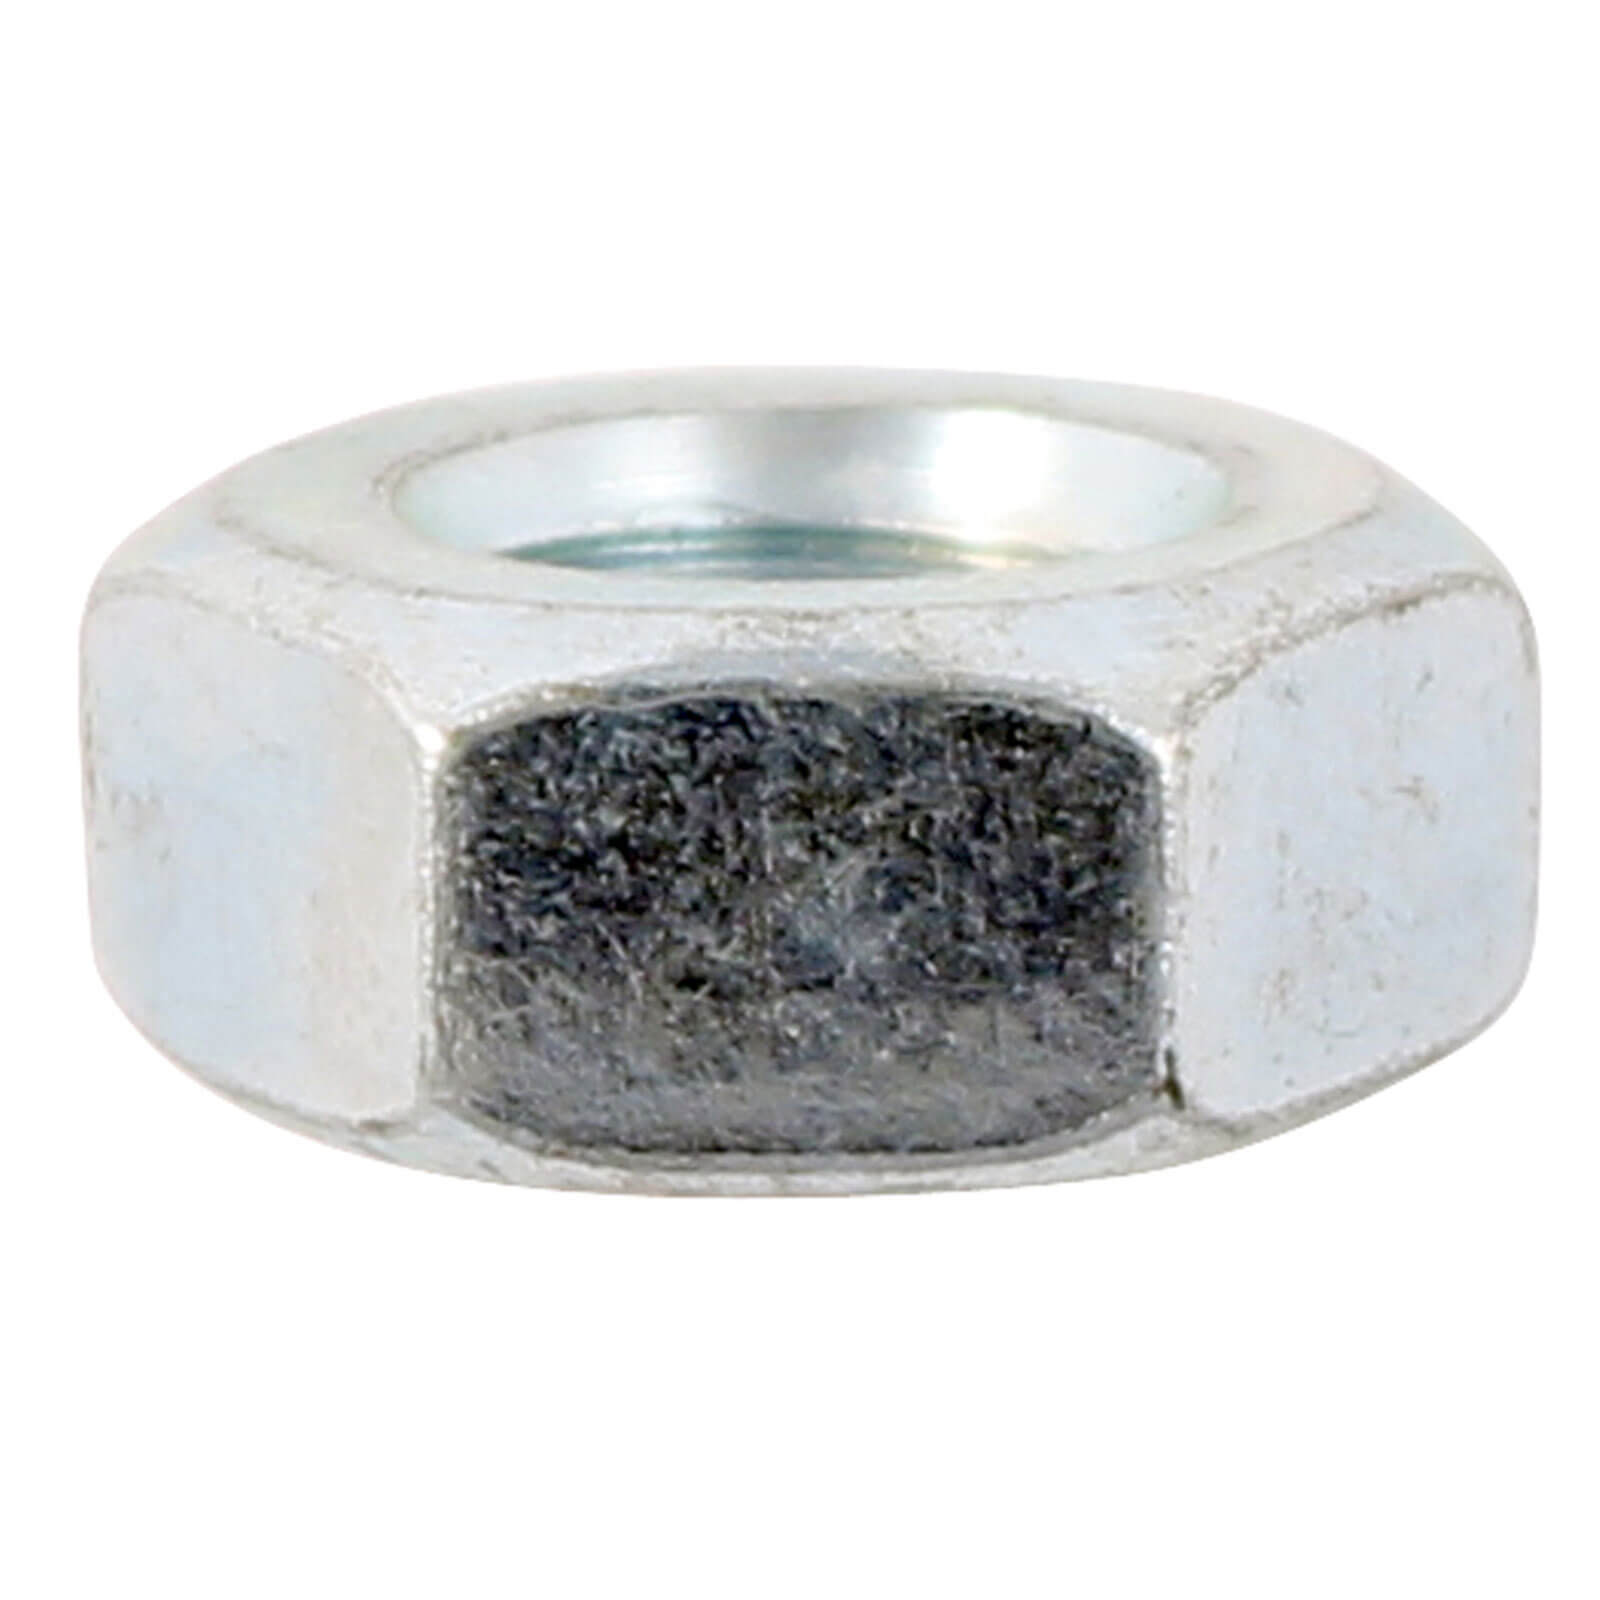 Image of Sirius A4 316 Hex Full Nut Stainless Steel M2